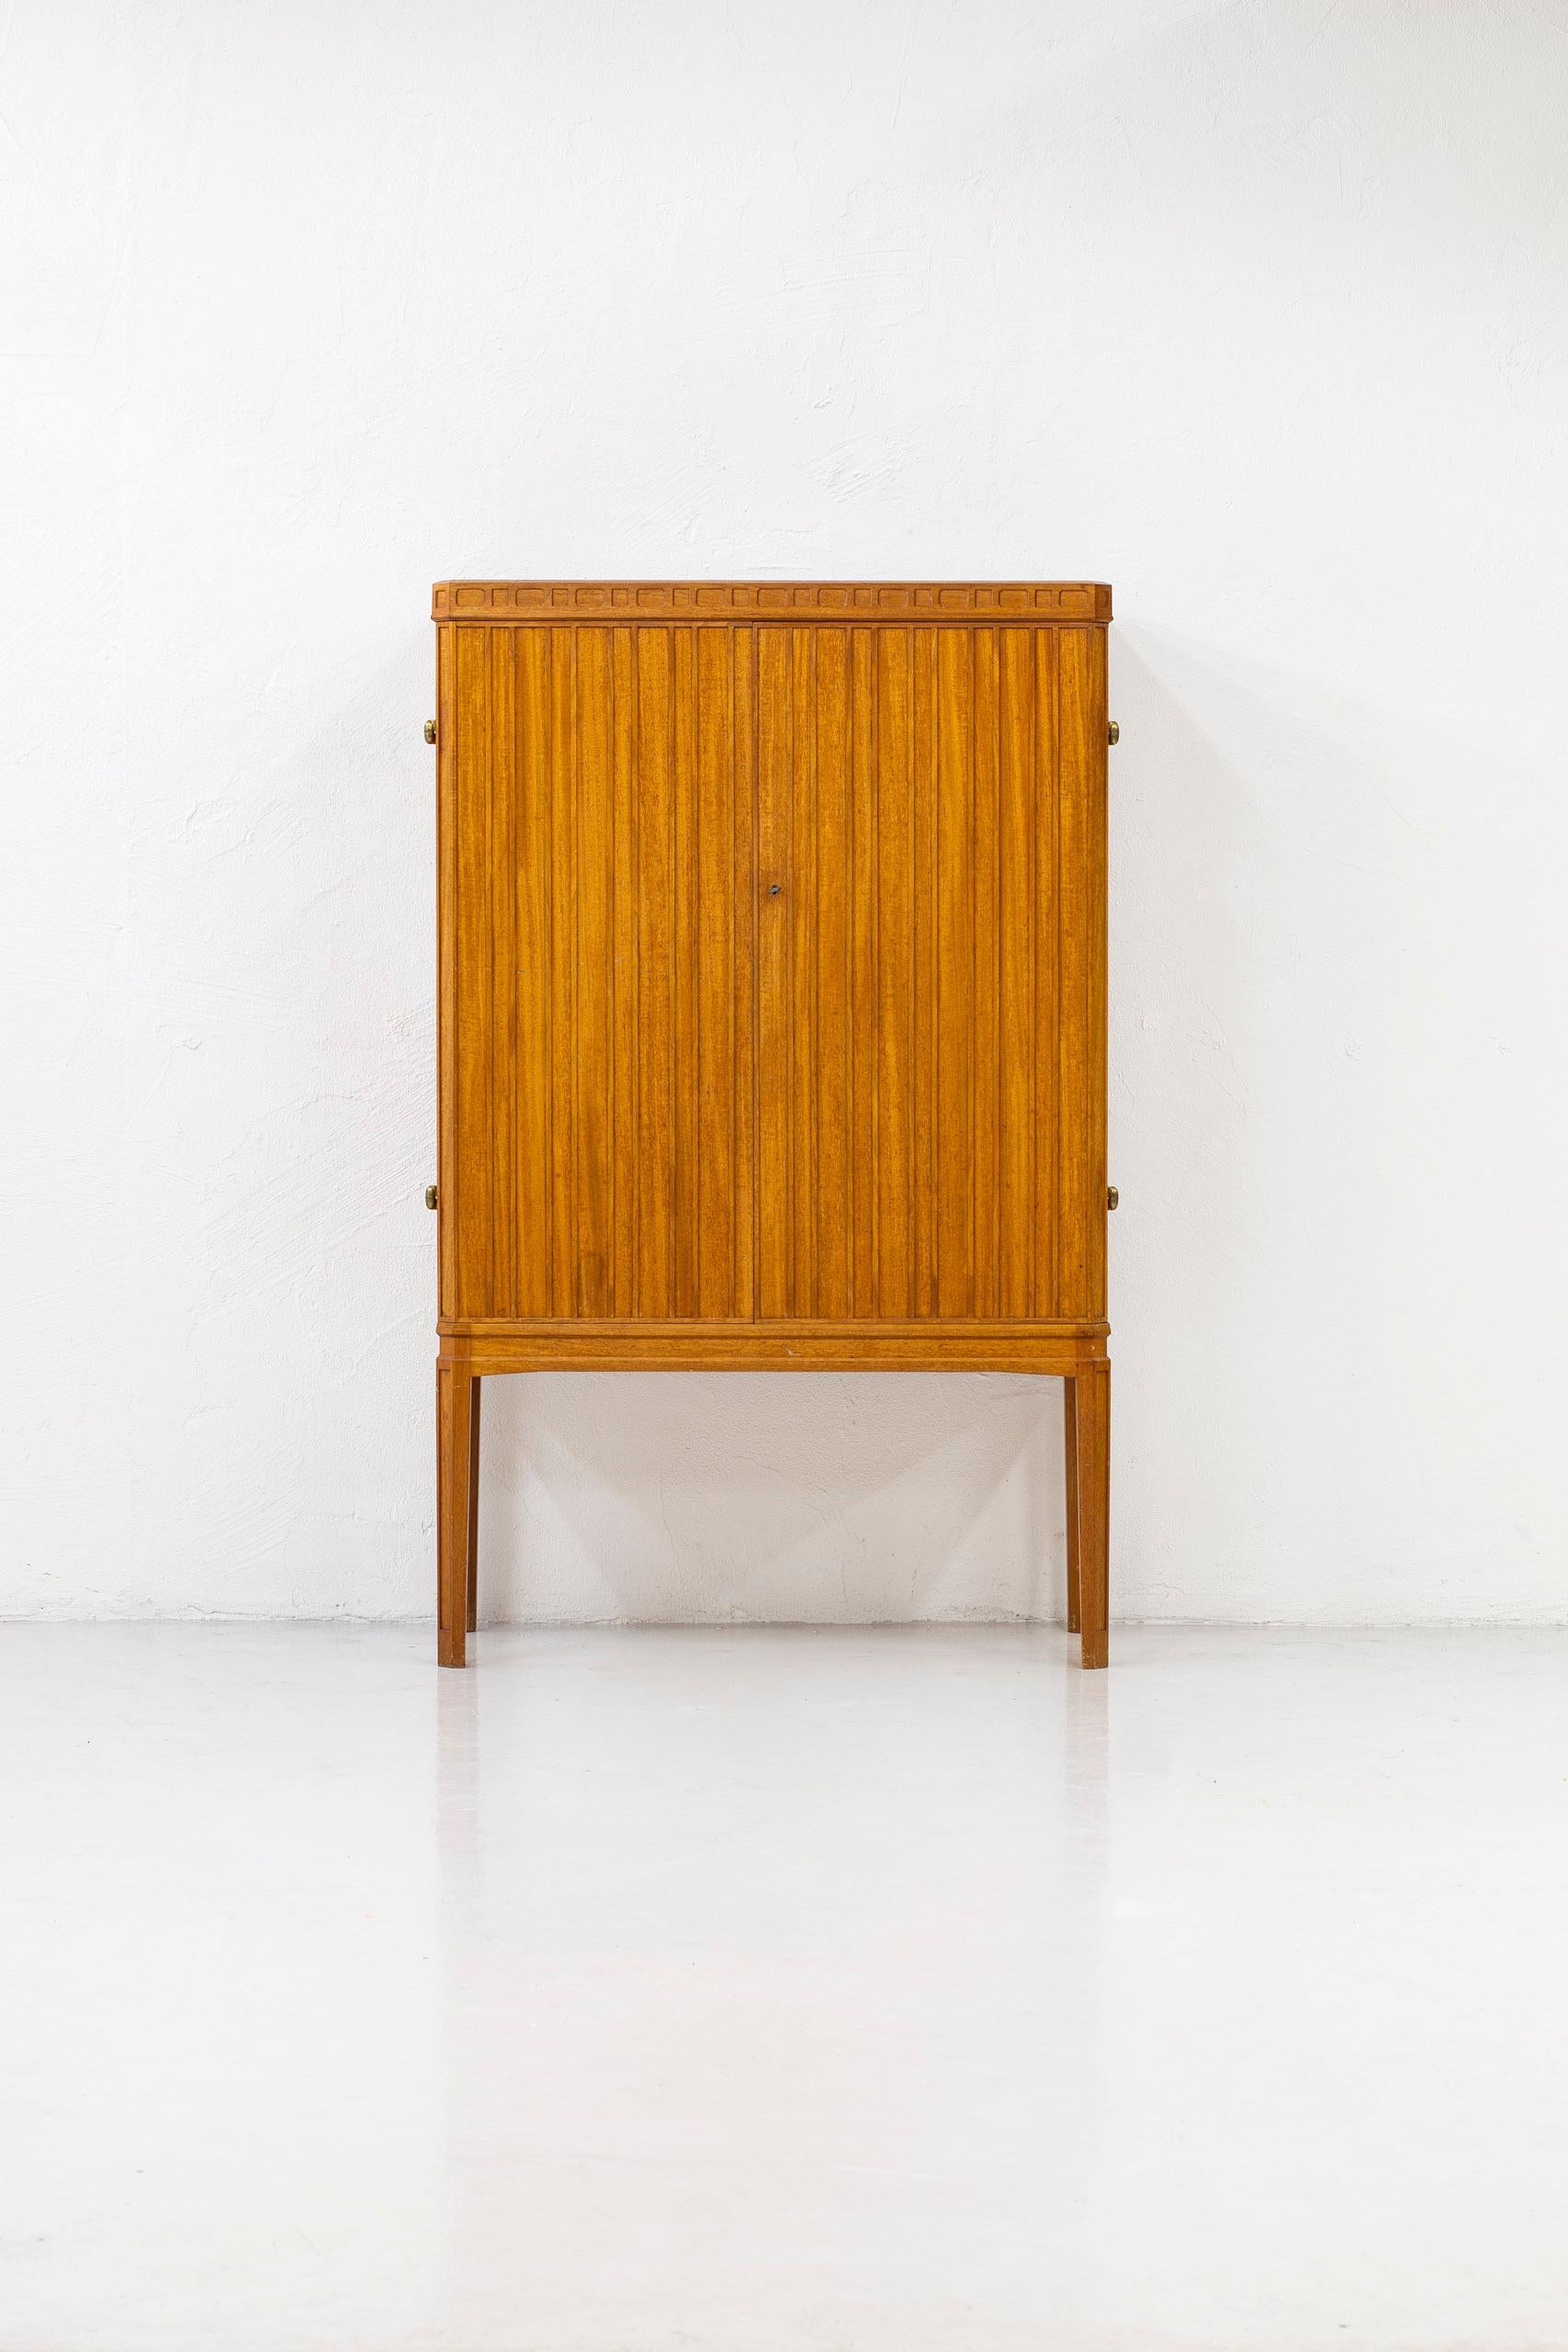 Swedish modern cabinet reminiscent to the style of Oscar Nilsson. Expertly manufactured by a cabinetmaker in Sweden during the 1940s. Made from teak with brass hinges and inside made from maple. With a strict relief pattern on the doors. Good